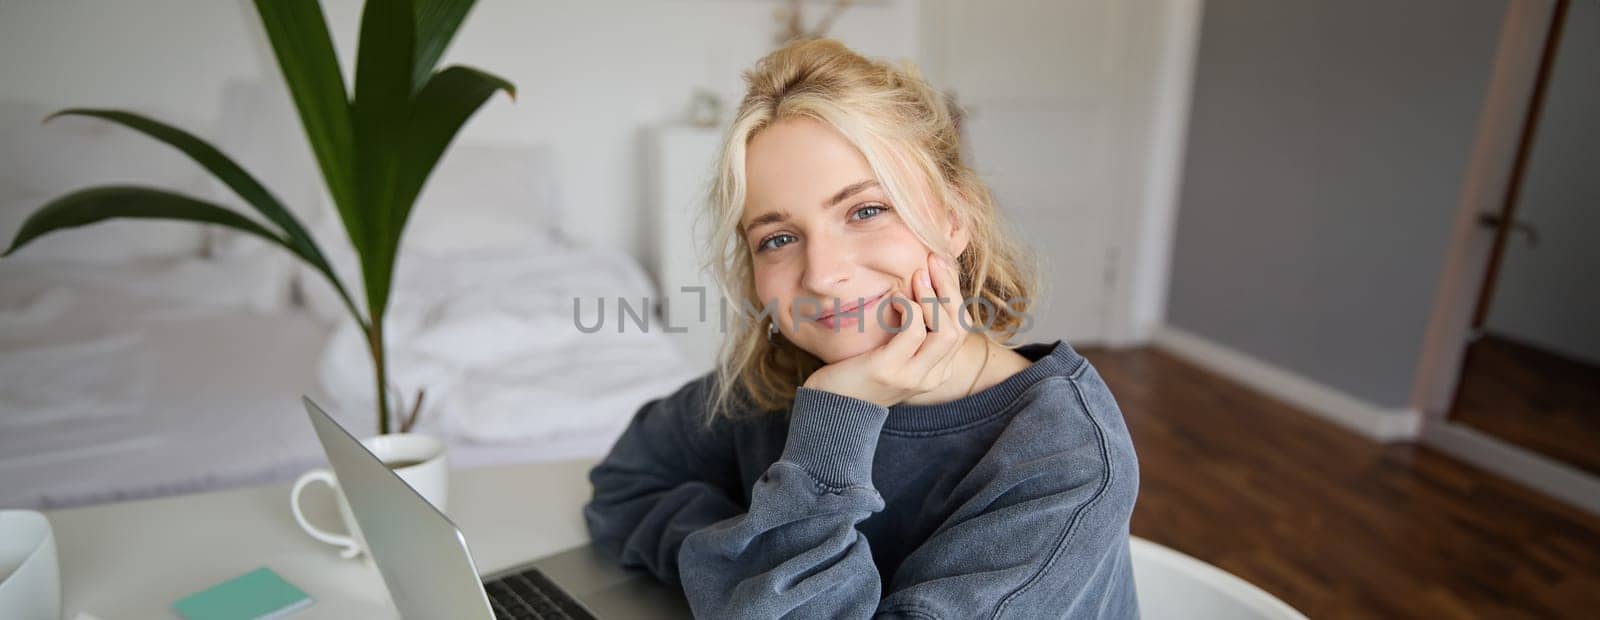 Portrait of young smiling woman, female student sitting in her room with laptop, looking cute at camera.